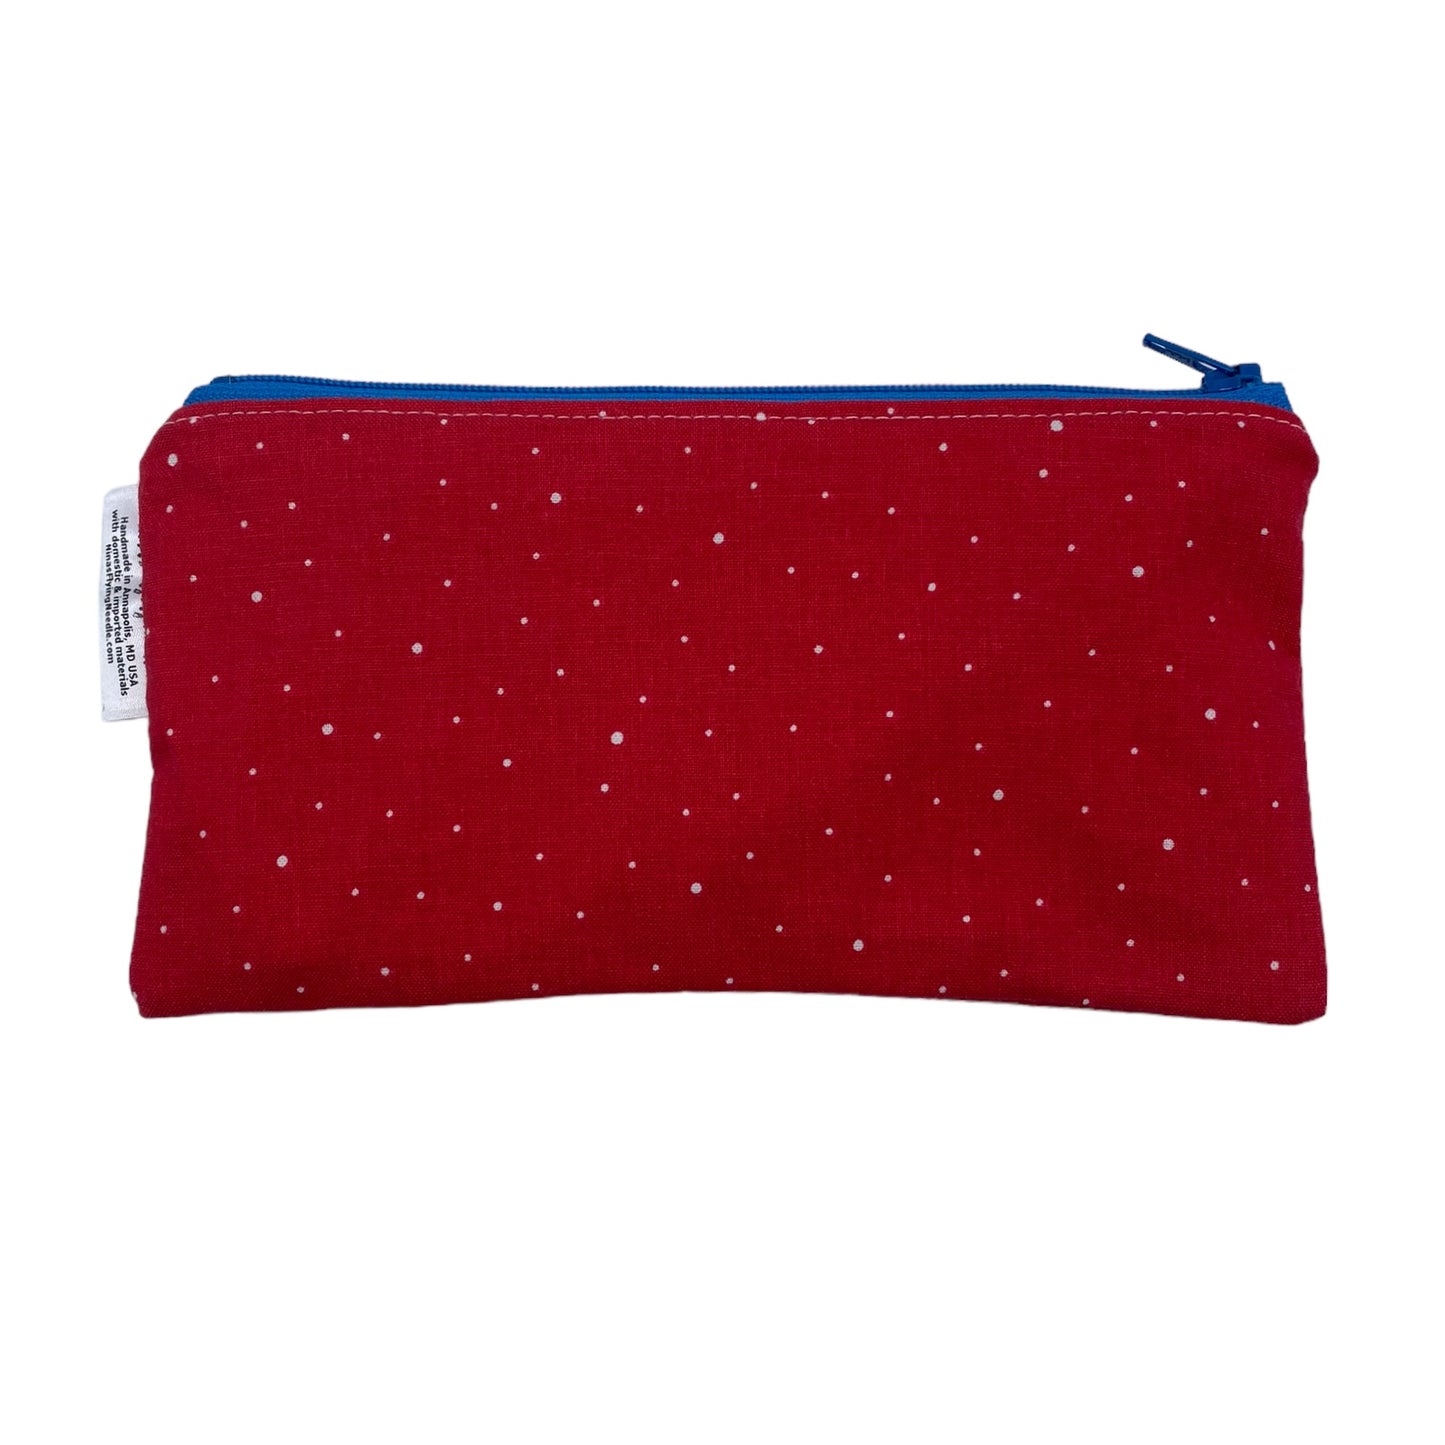 Knick Knack Sized Reusable Zippered Bag Dots on Red